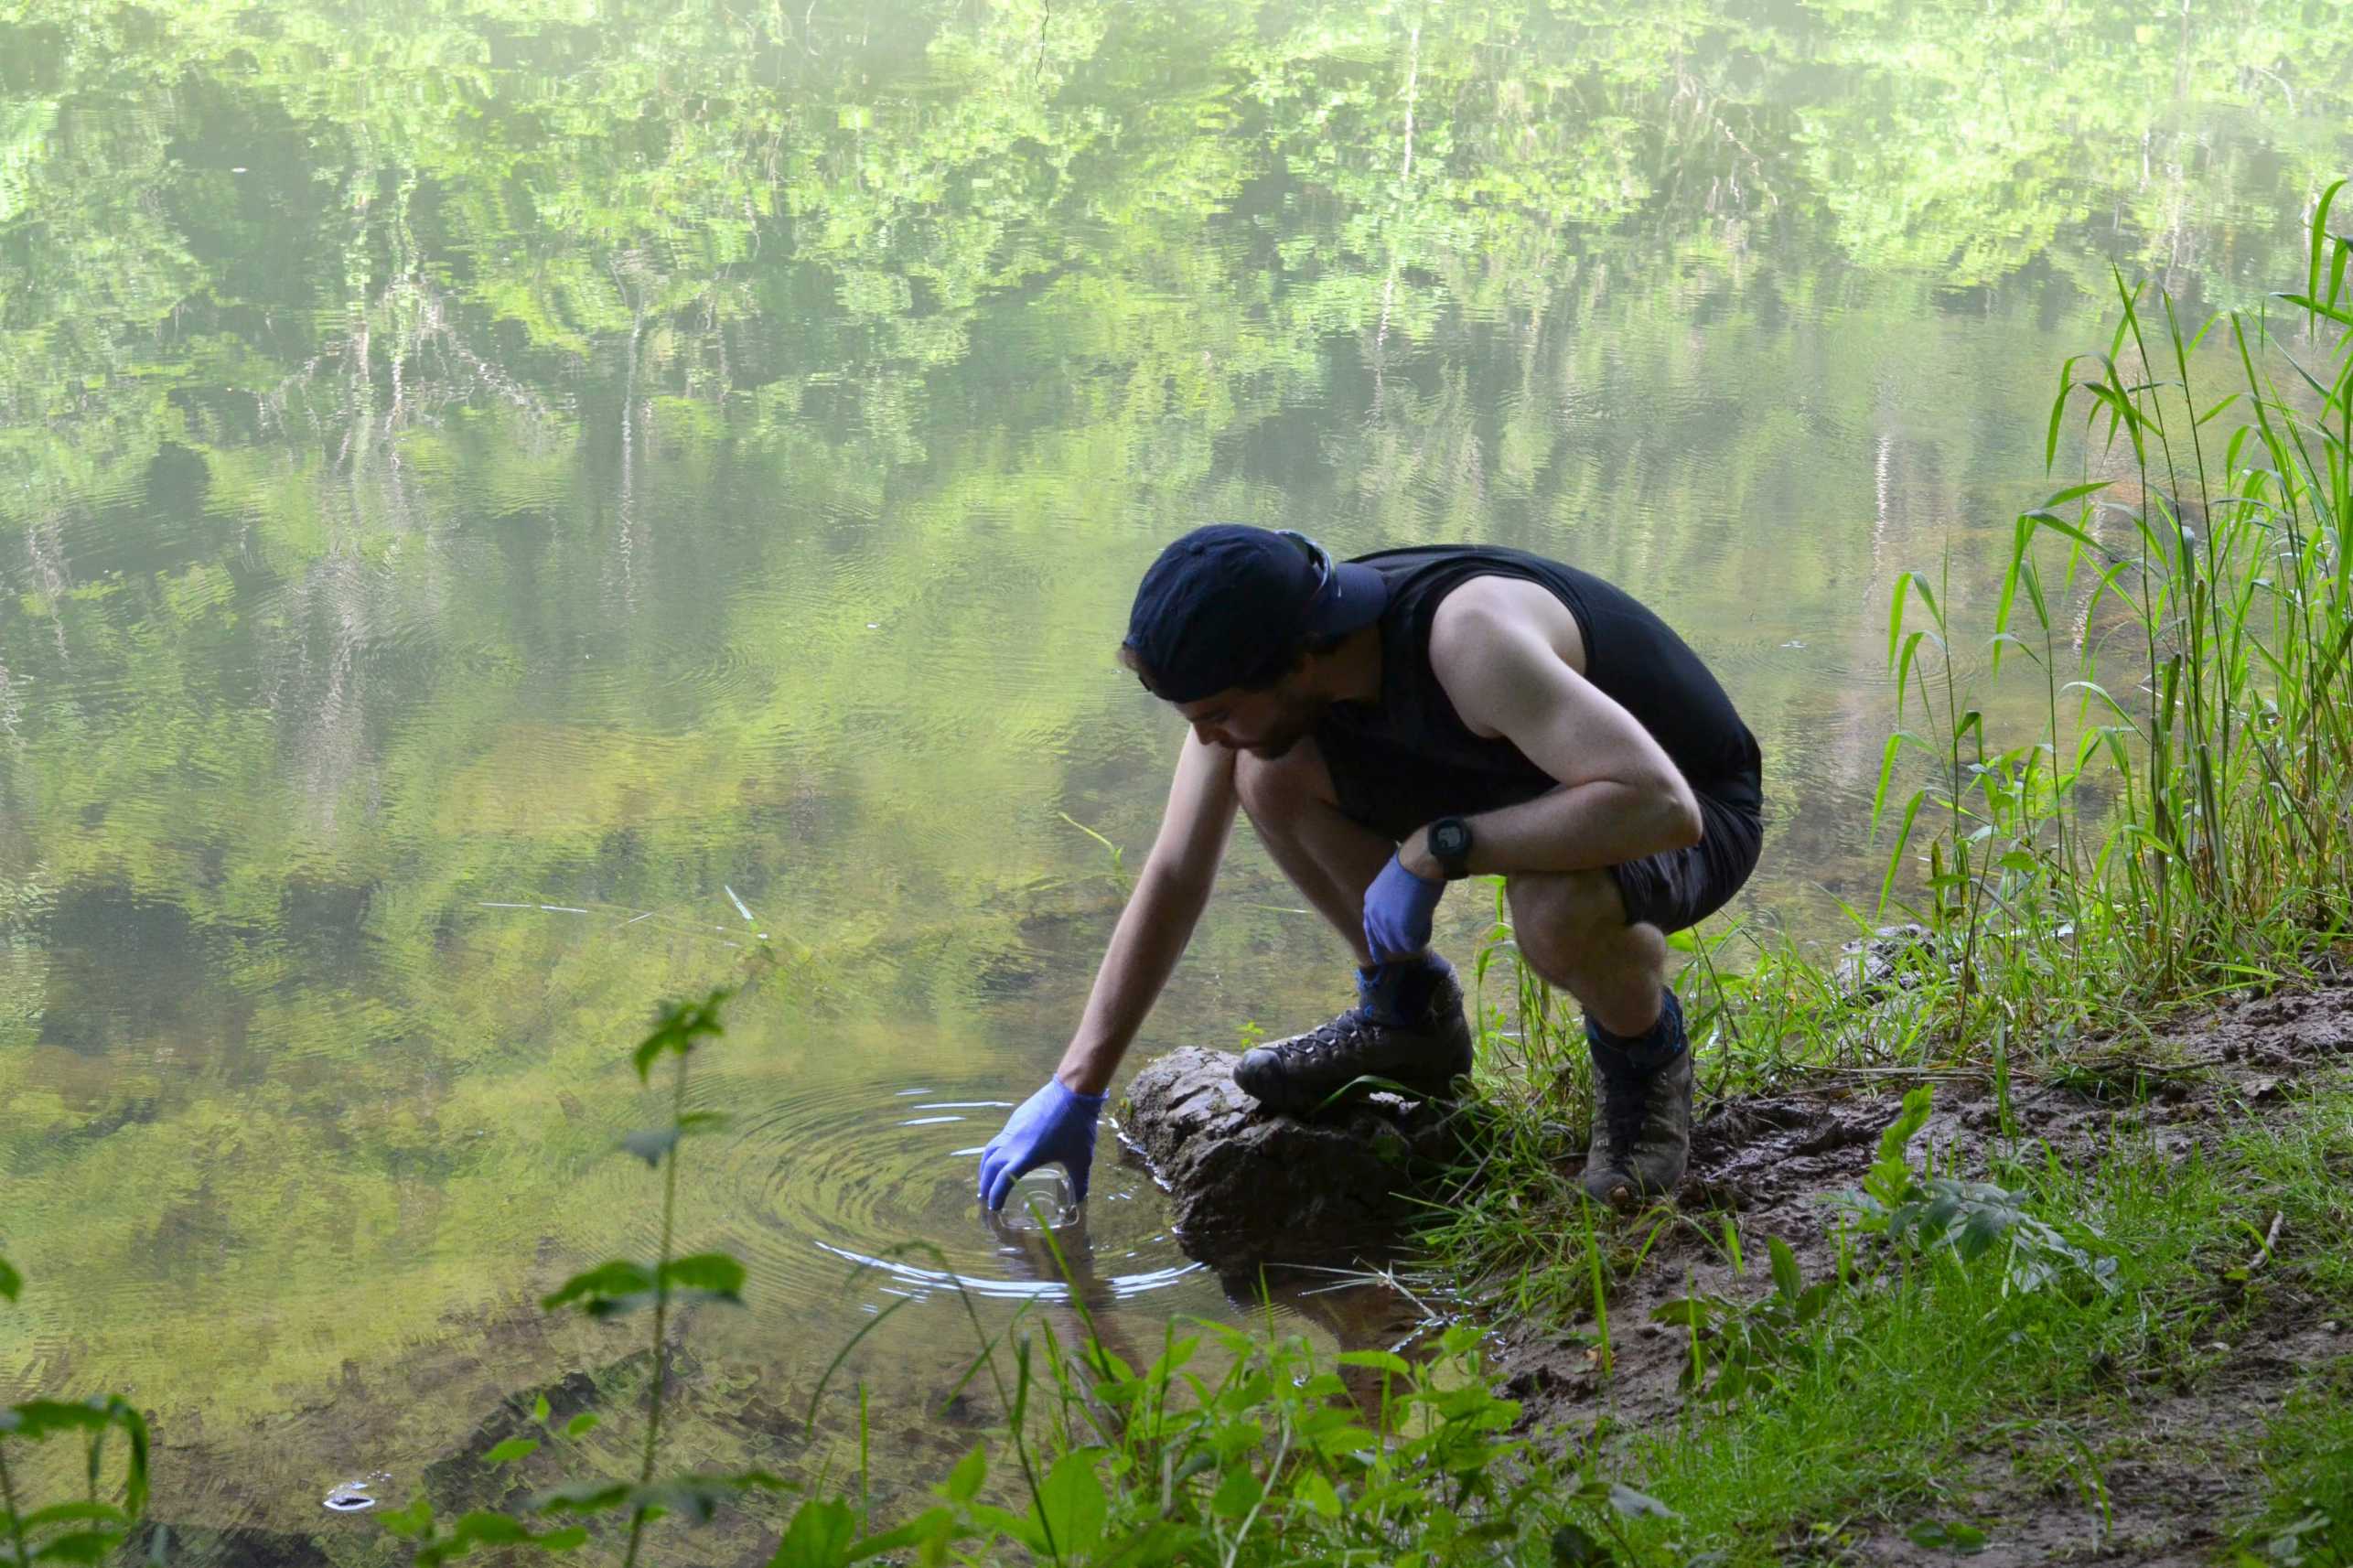 Person at the river takes a sample.